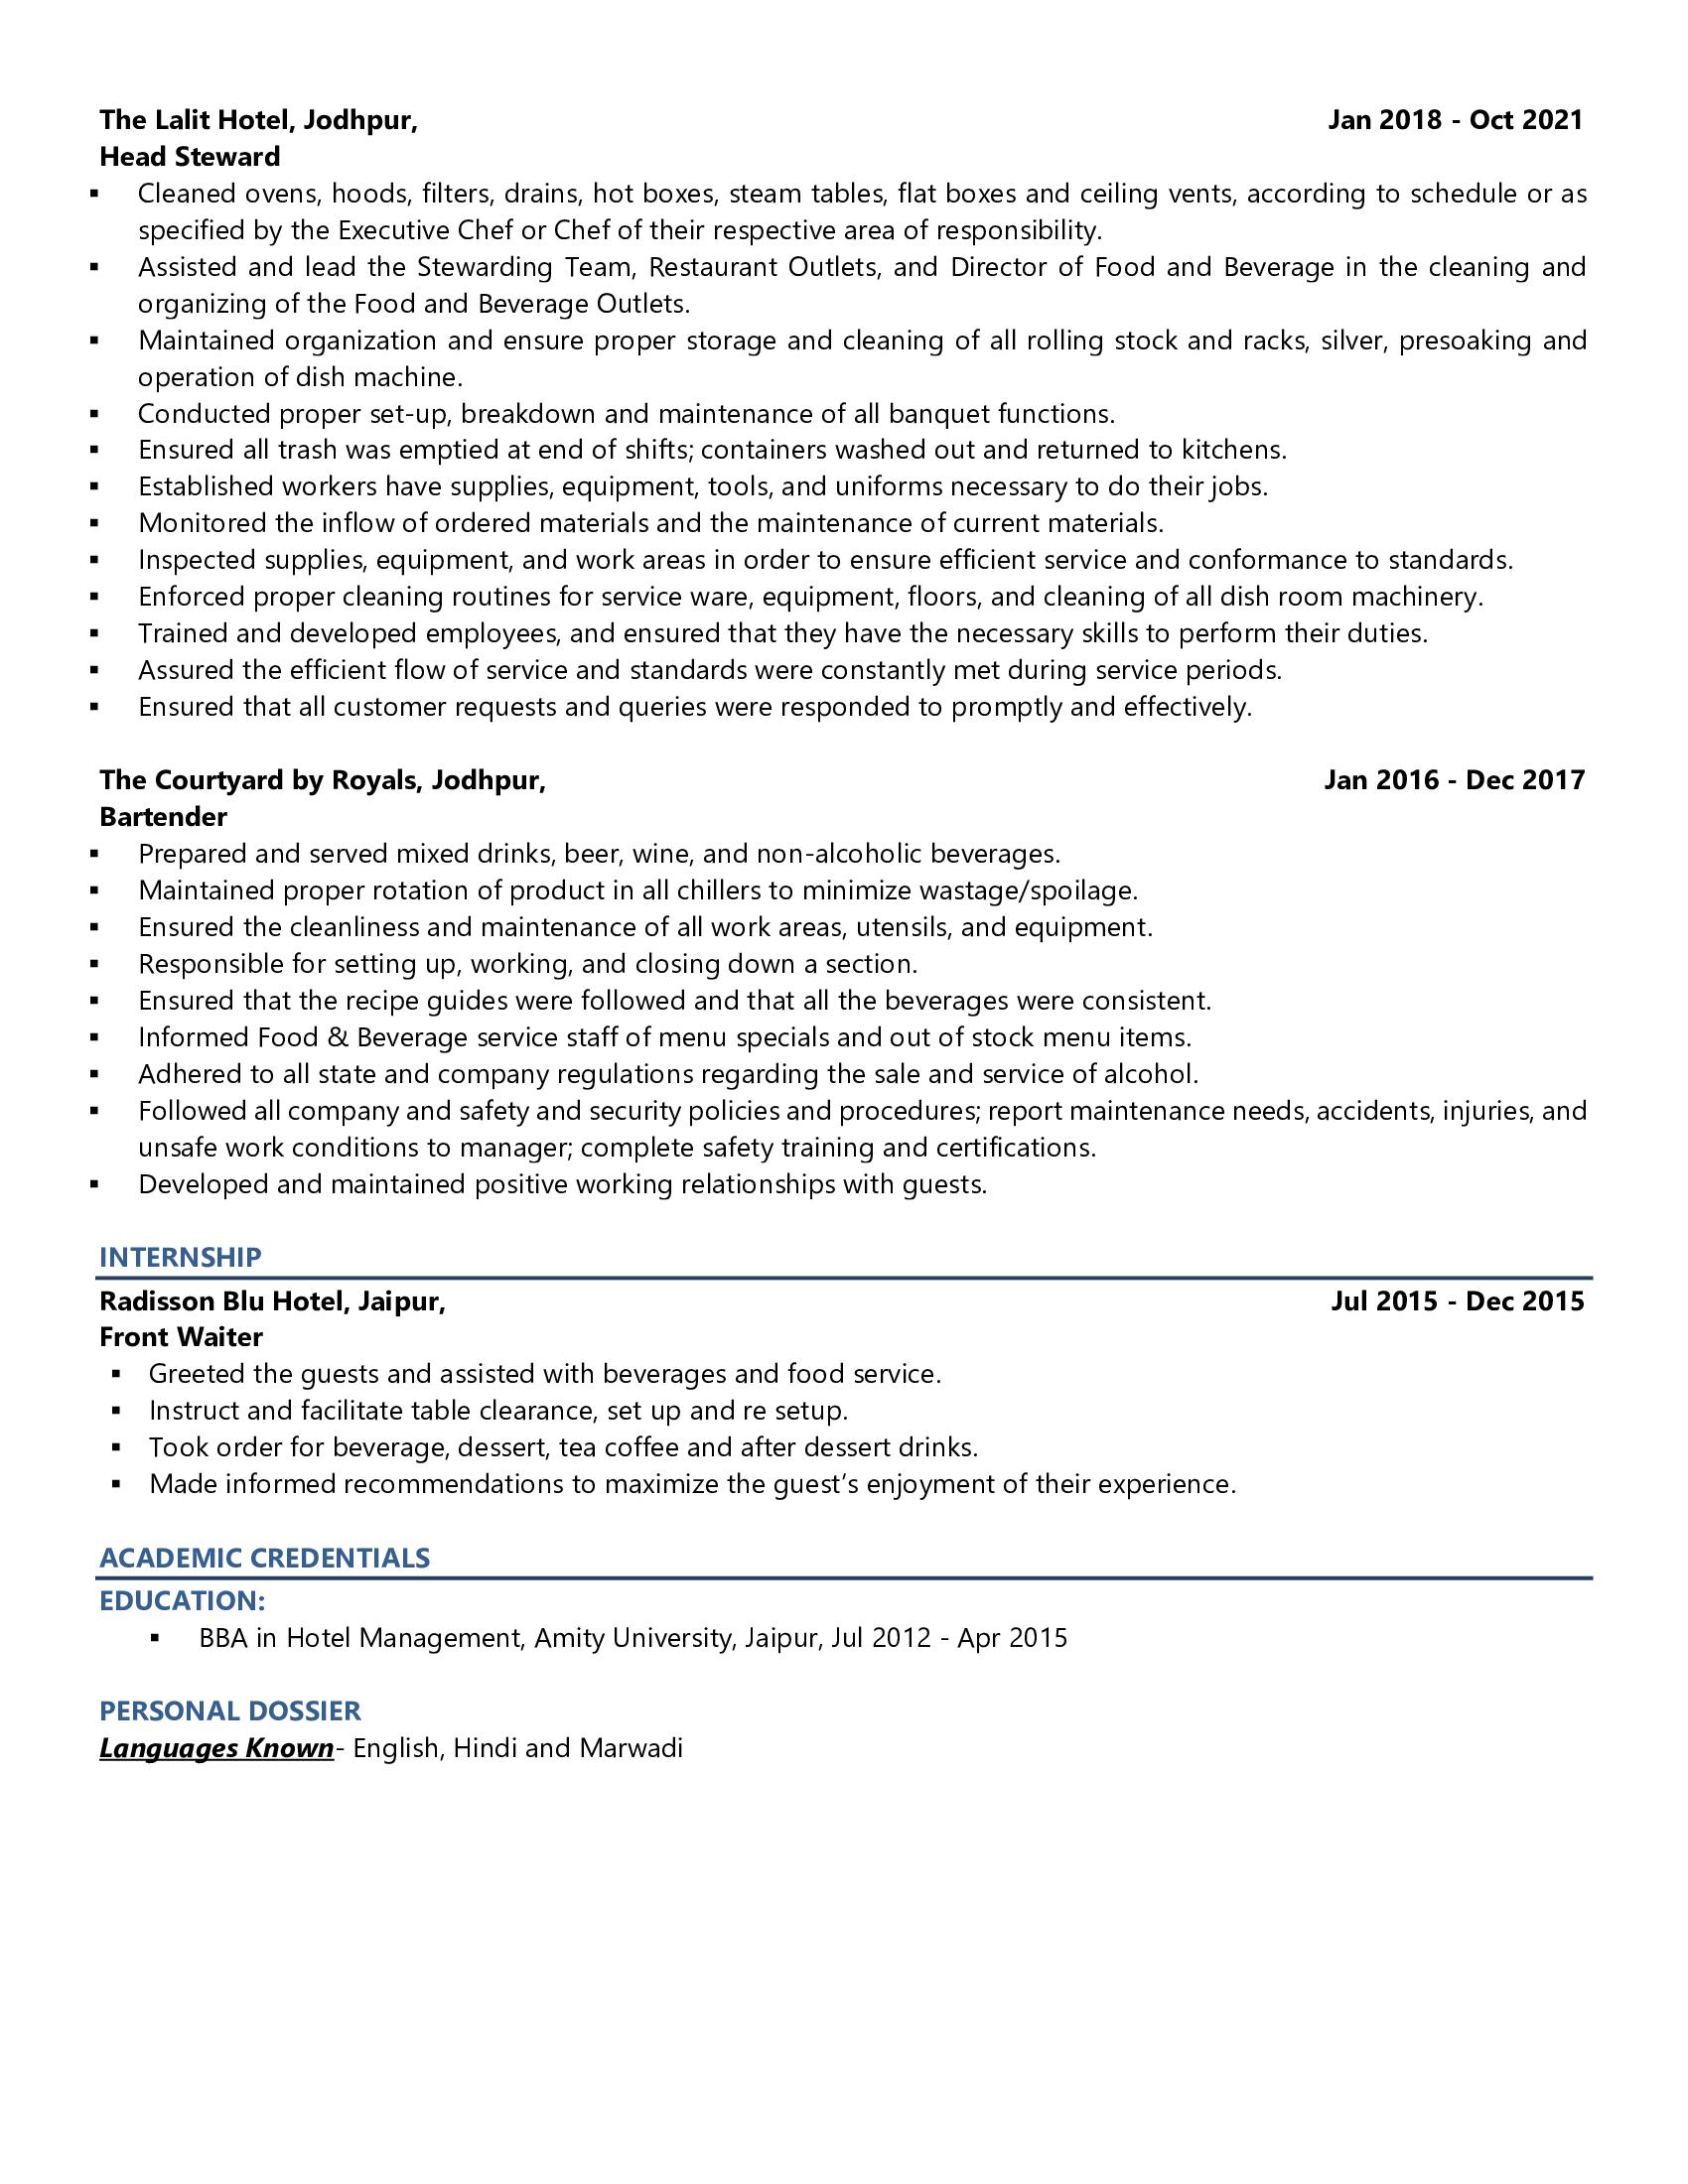 FOH Manager - Resume Example & Template